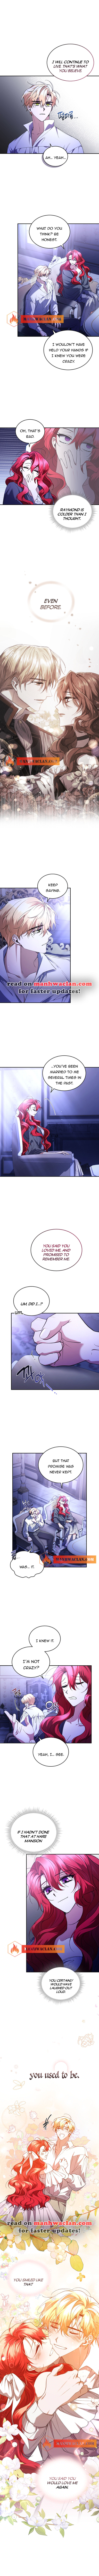 Resetting Lady - Page 4